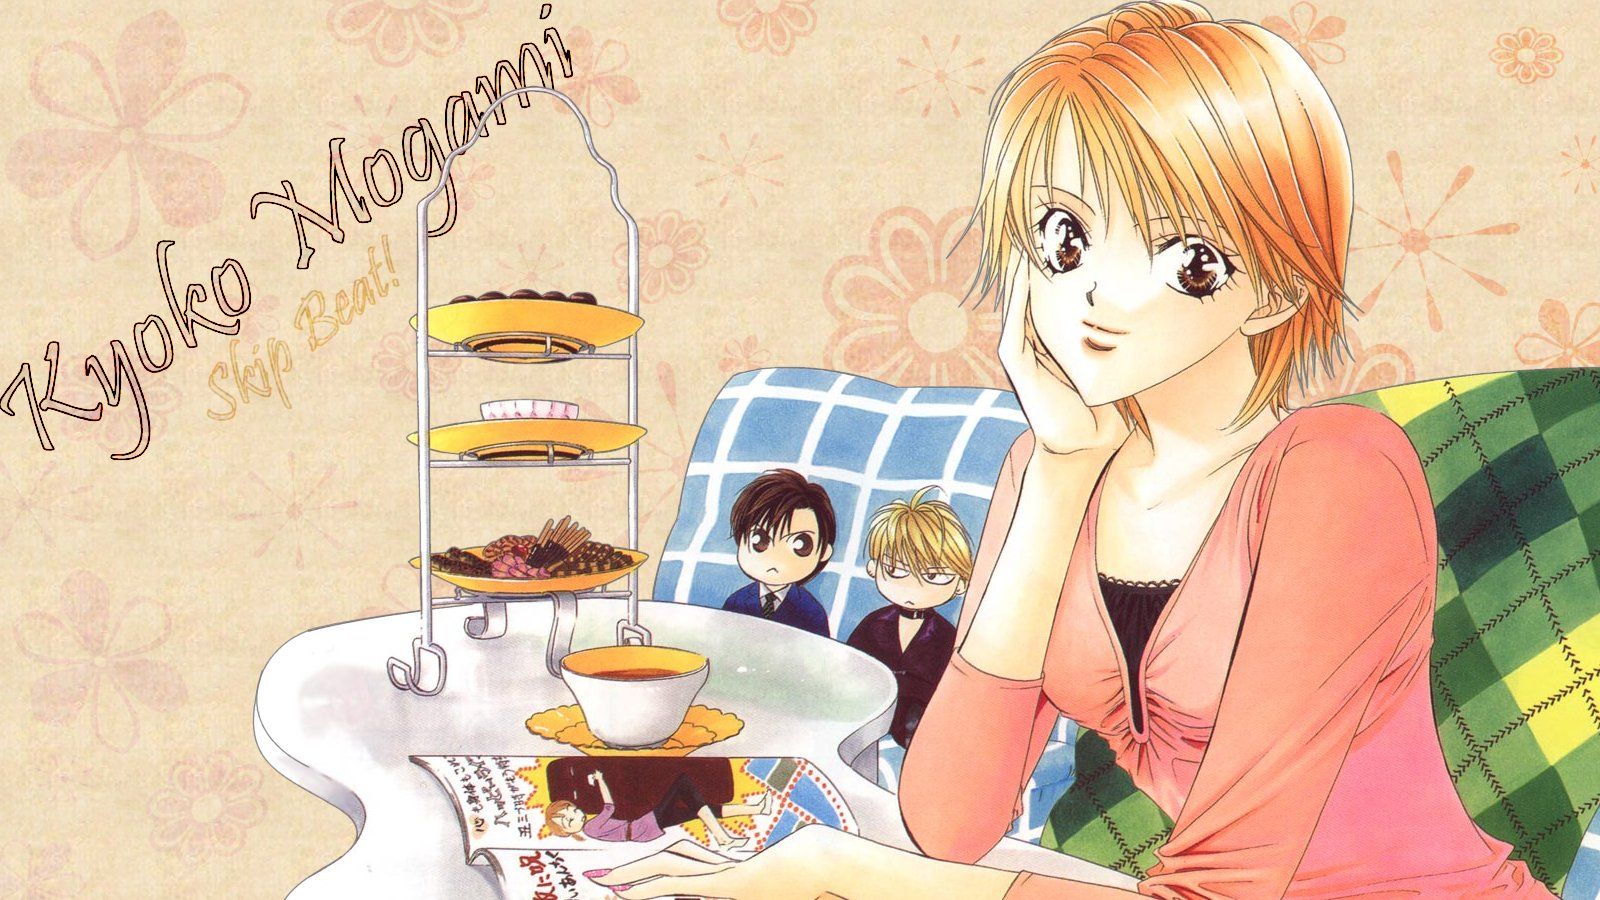 Skip Beat! and Scan Gallery